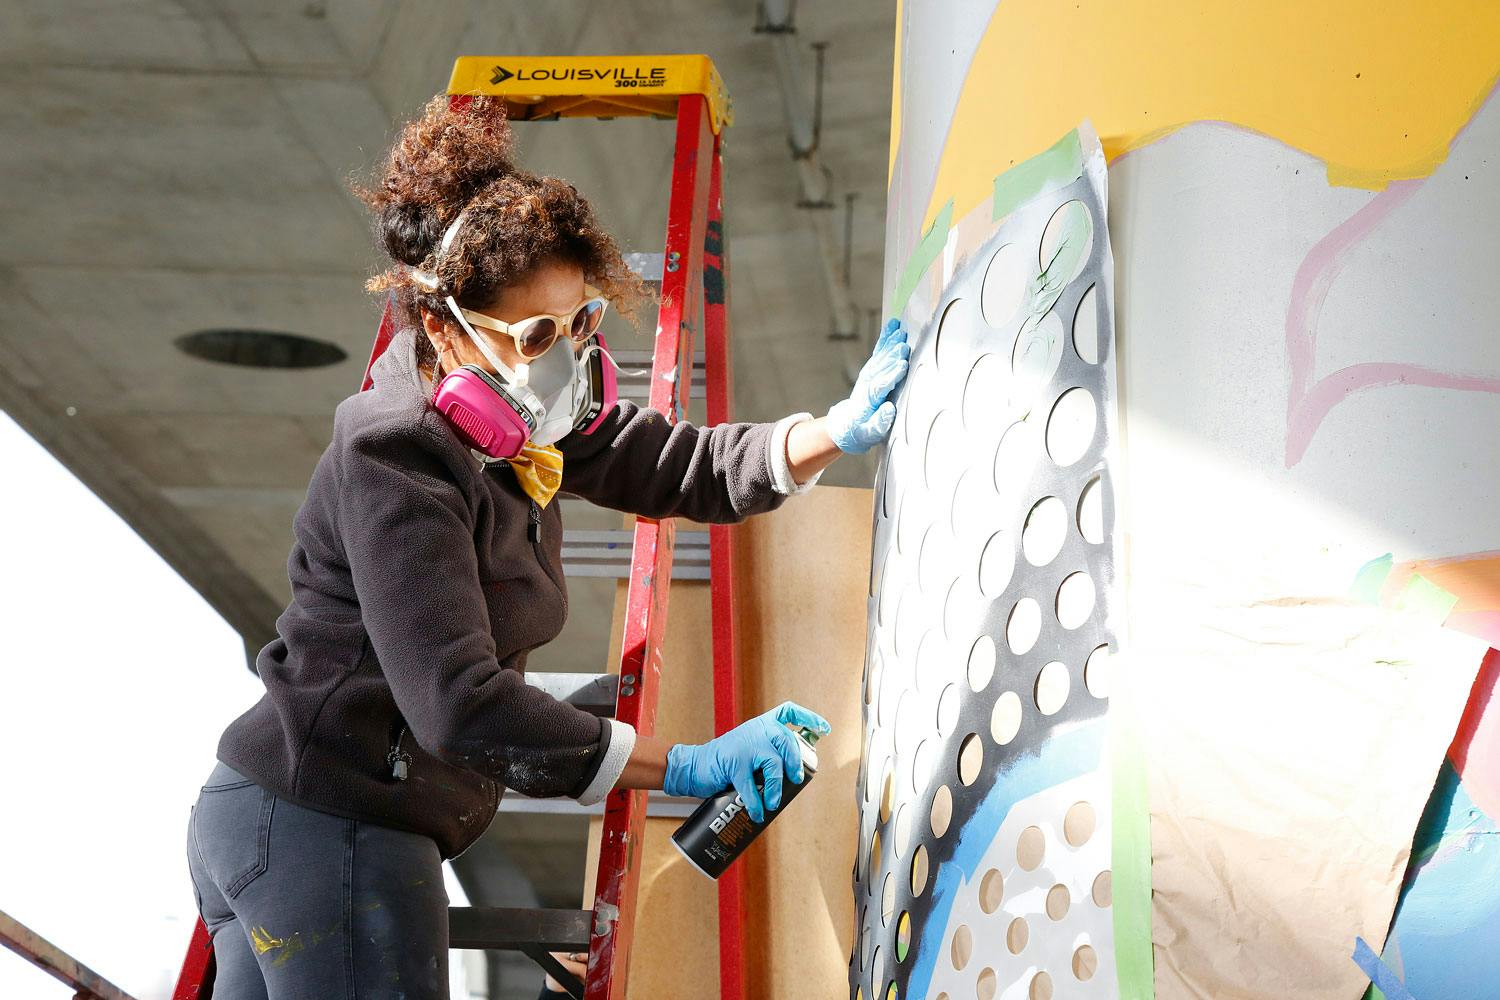 Silvia Lopez Chavez works on a mural project, while a red ladder appears behind her.